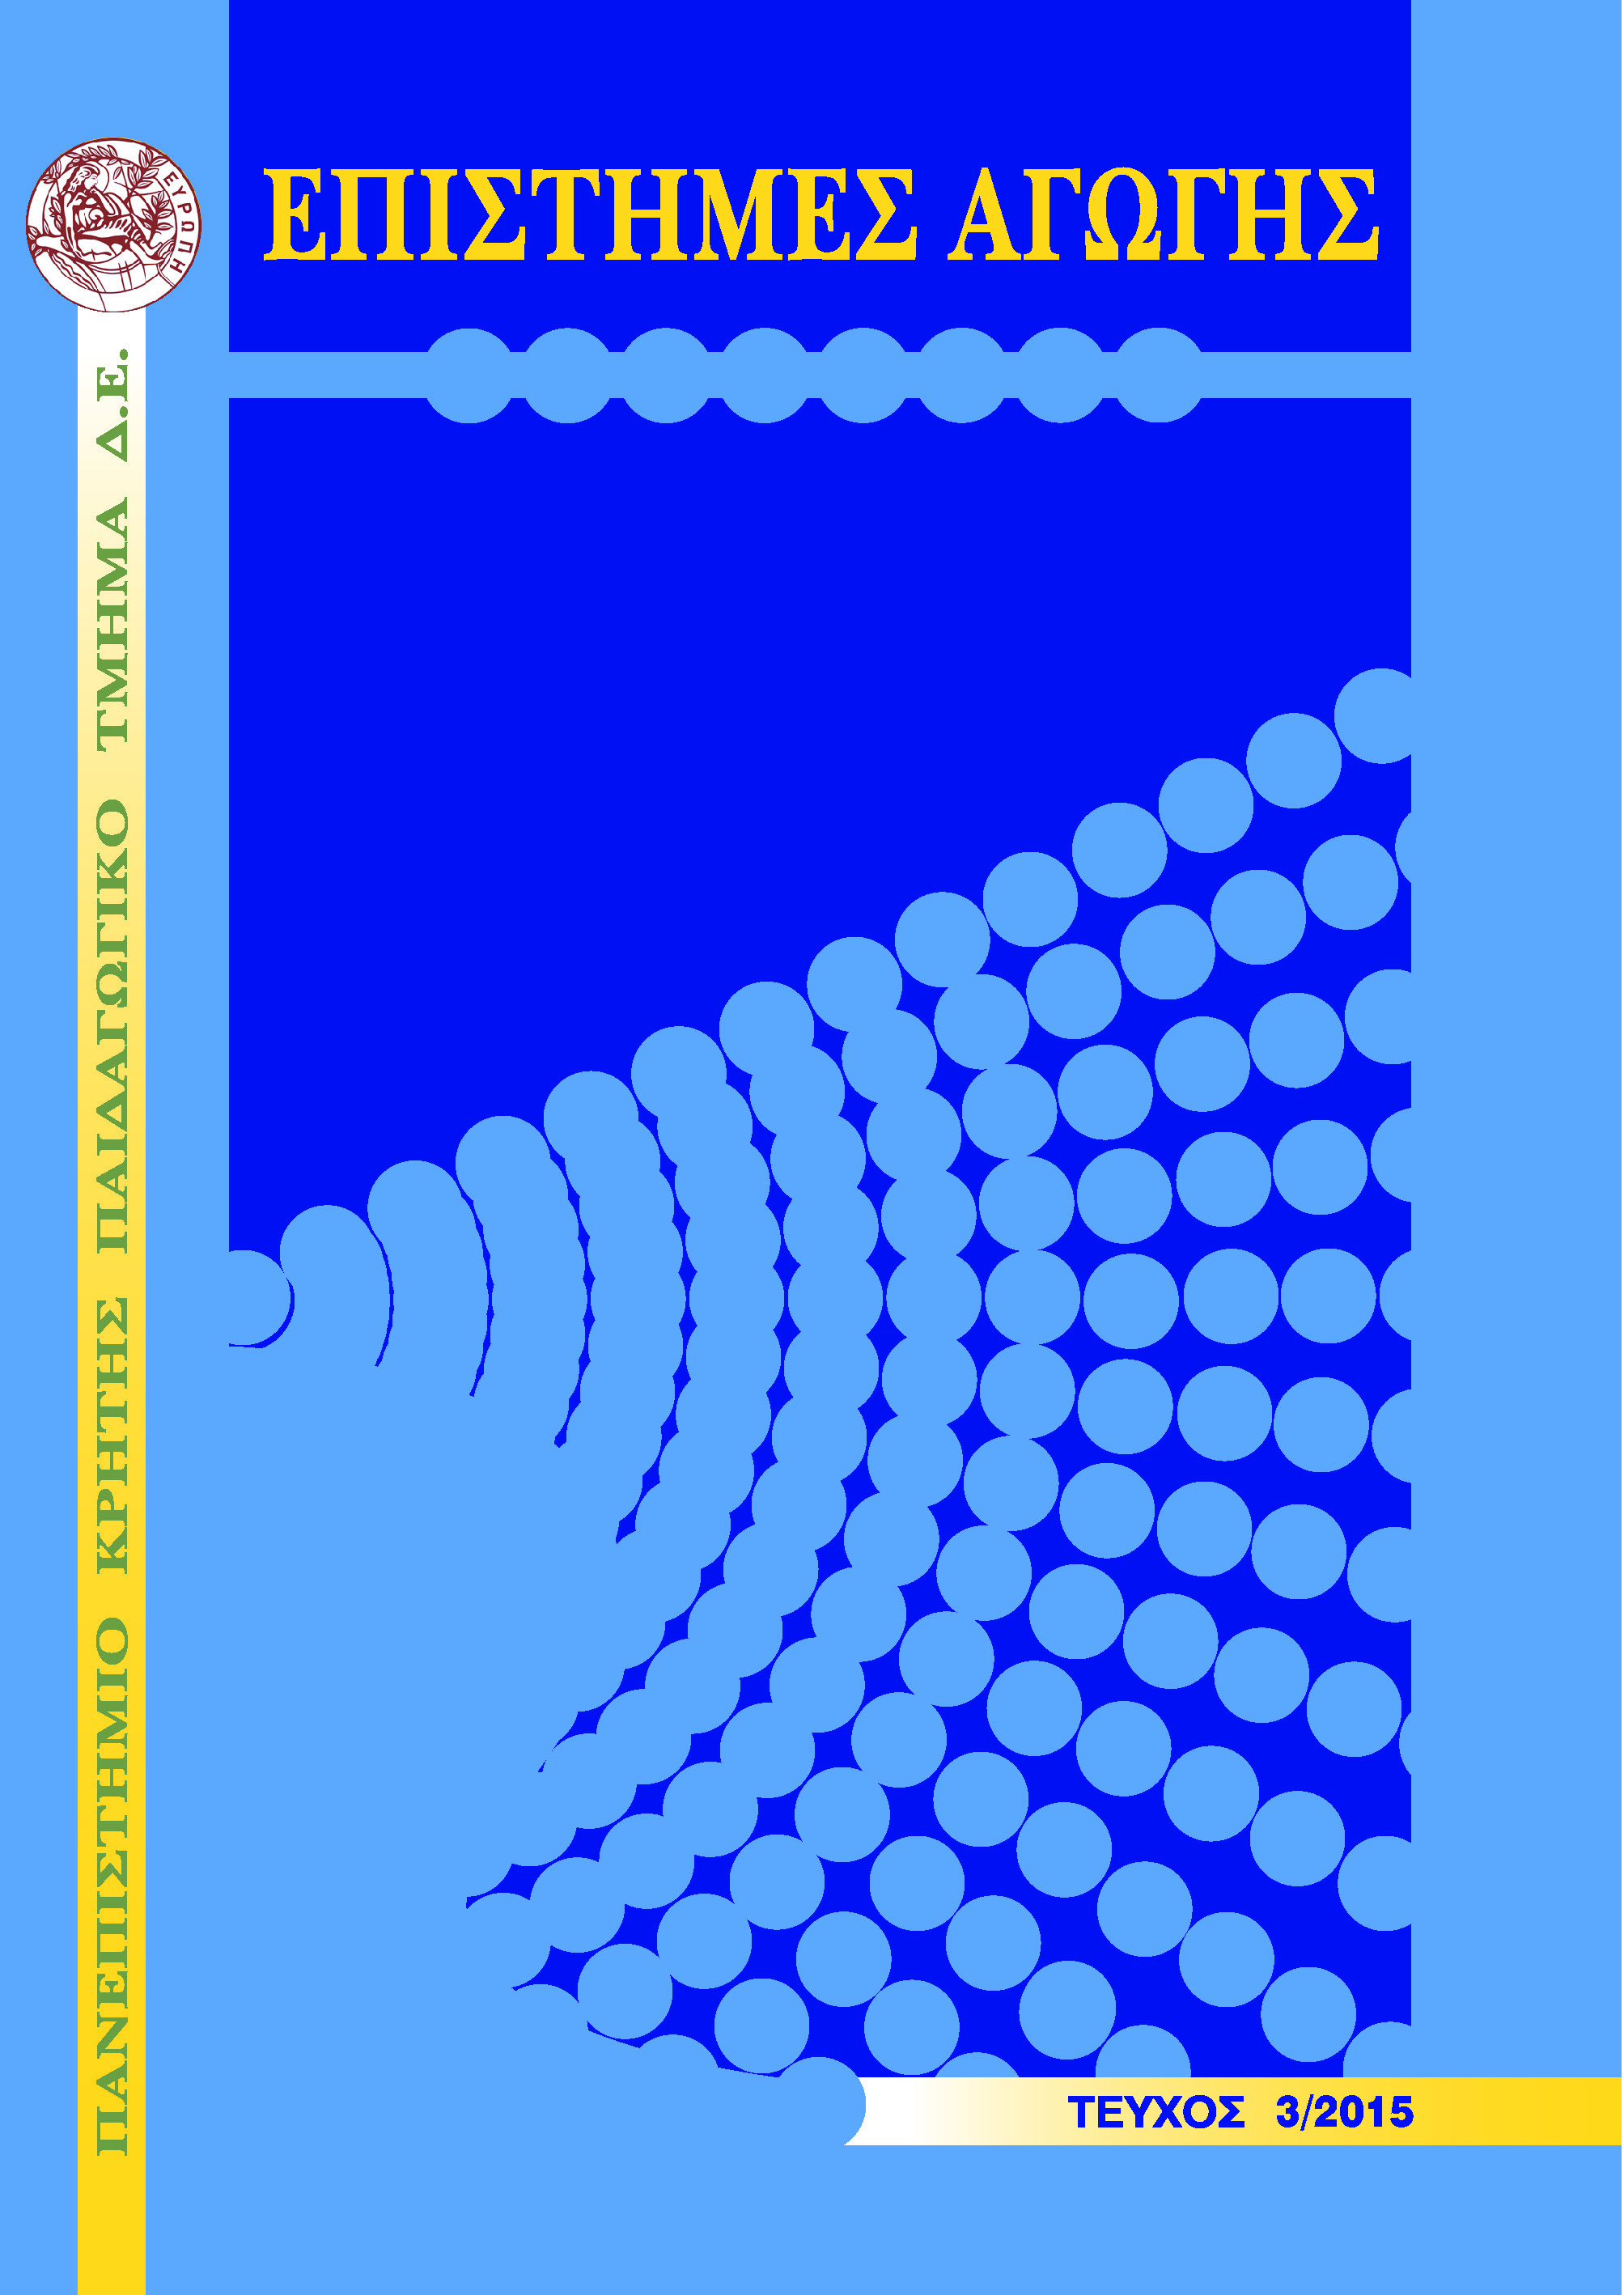 Education Sciences 2015, Issue 3 COVER